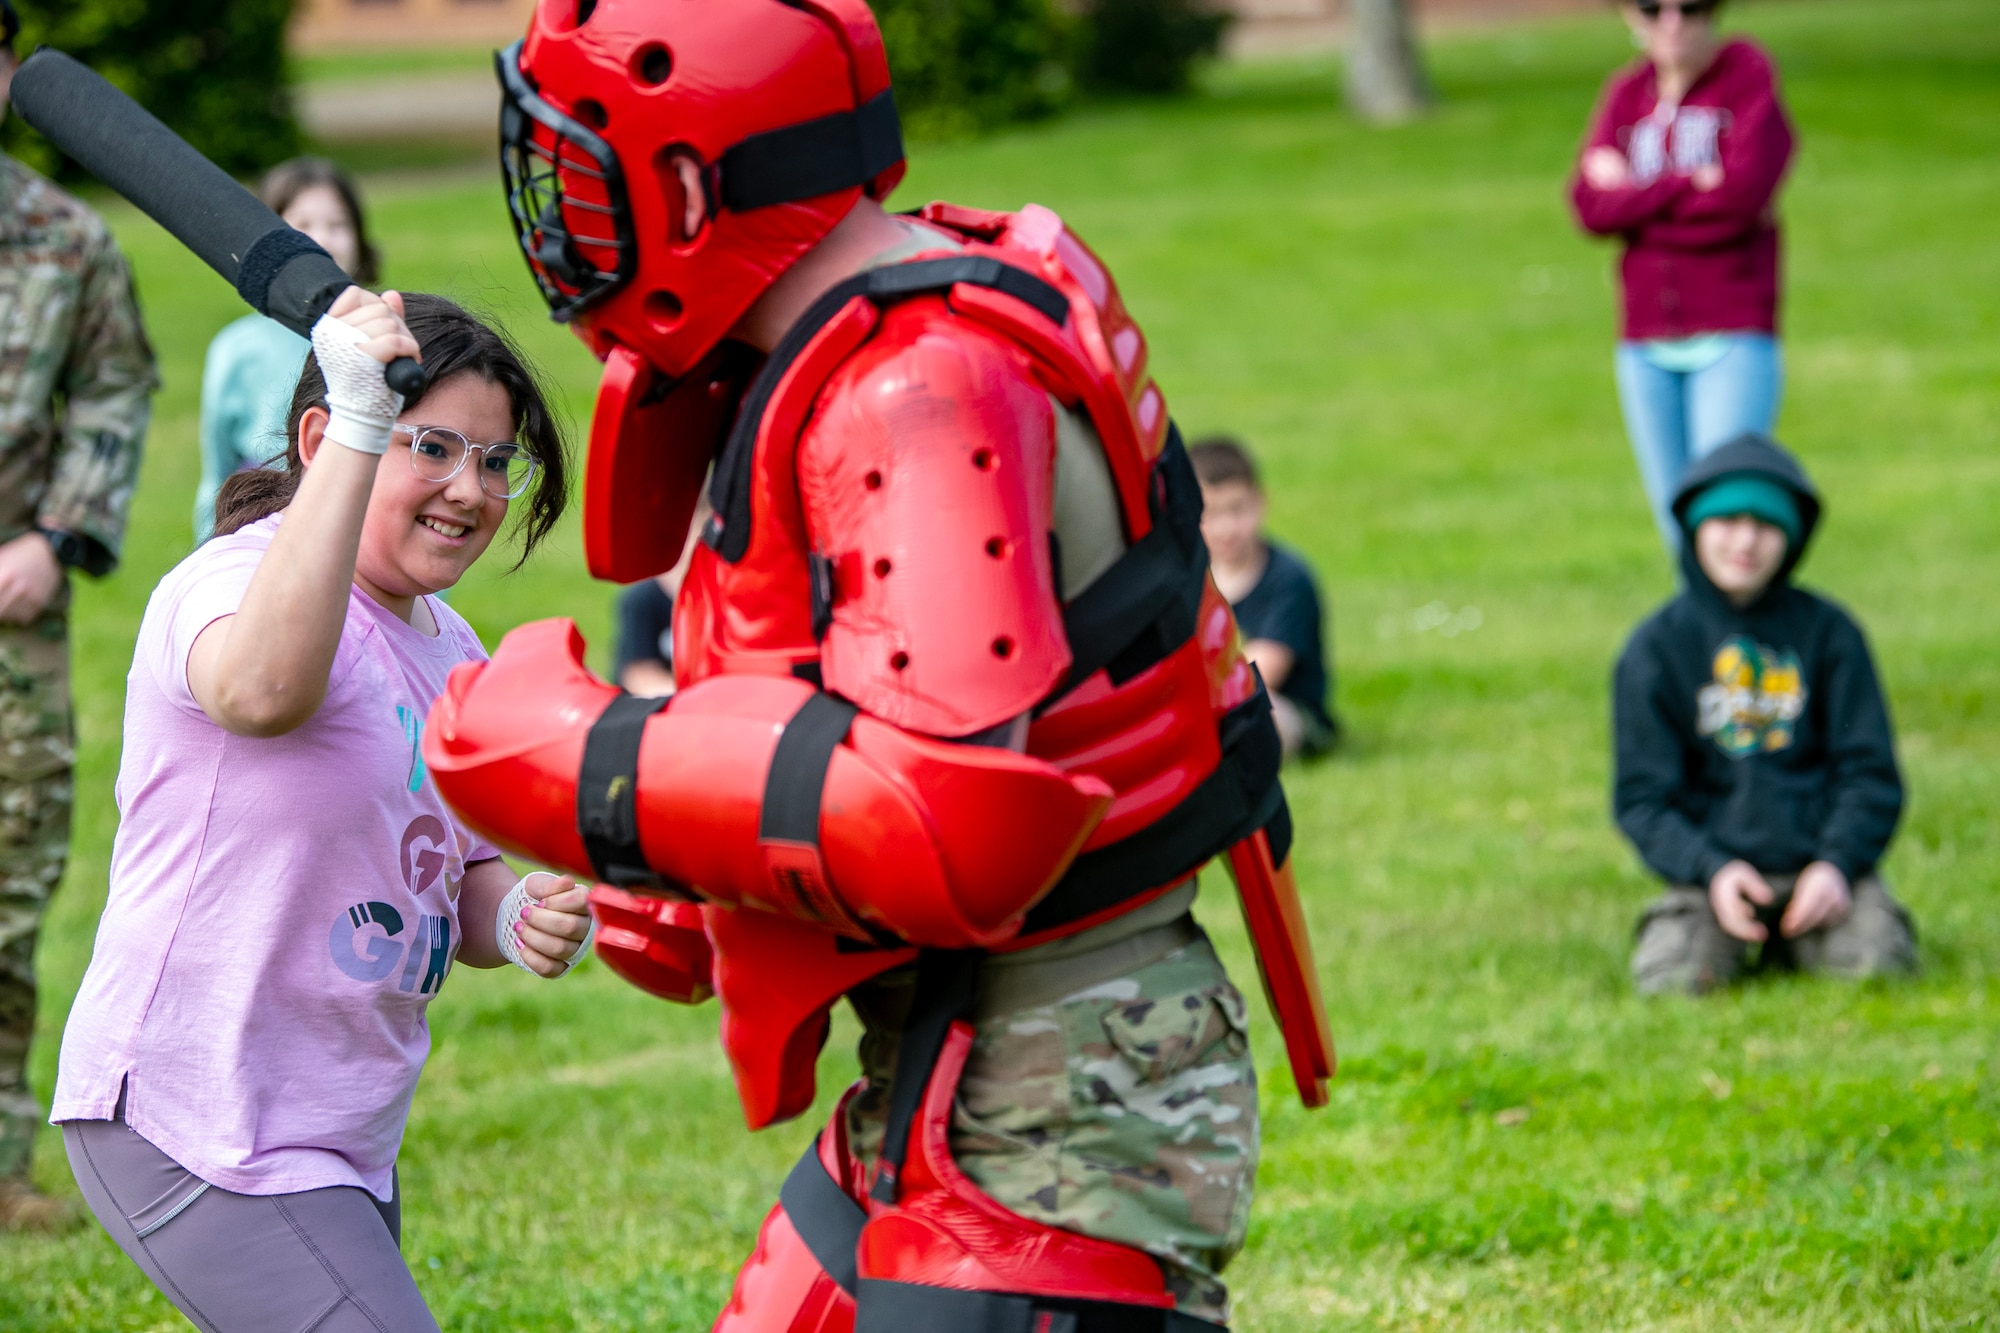 An Alconbury elementary school student demonstrates combatives with a member from the 423d Security Forces Squadron at RAF Alconbury, England, May 18, 2023. As part of National Police Week students were able to engage with members and learn more about the capabilities of the 423d SFS. (U.S. Air Force photo by Staff Sgt. Eugene Oliver)